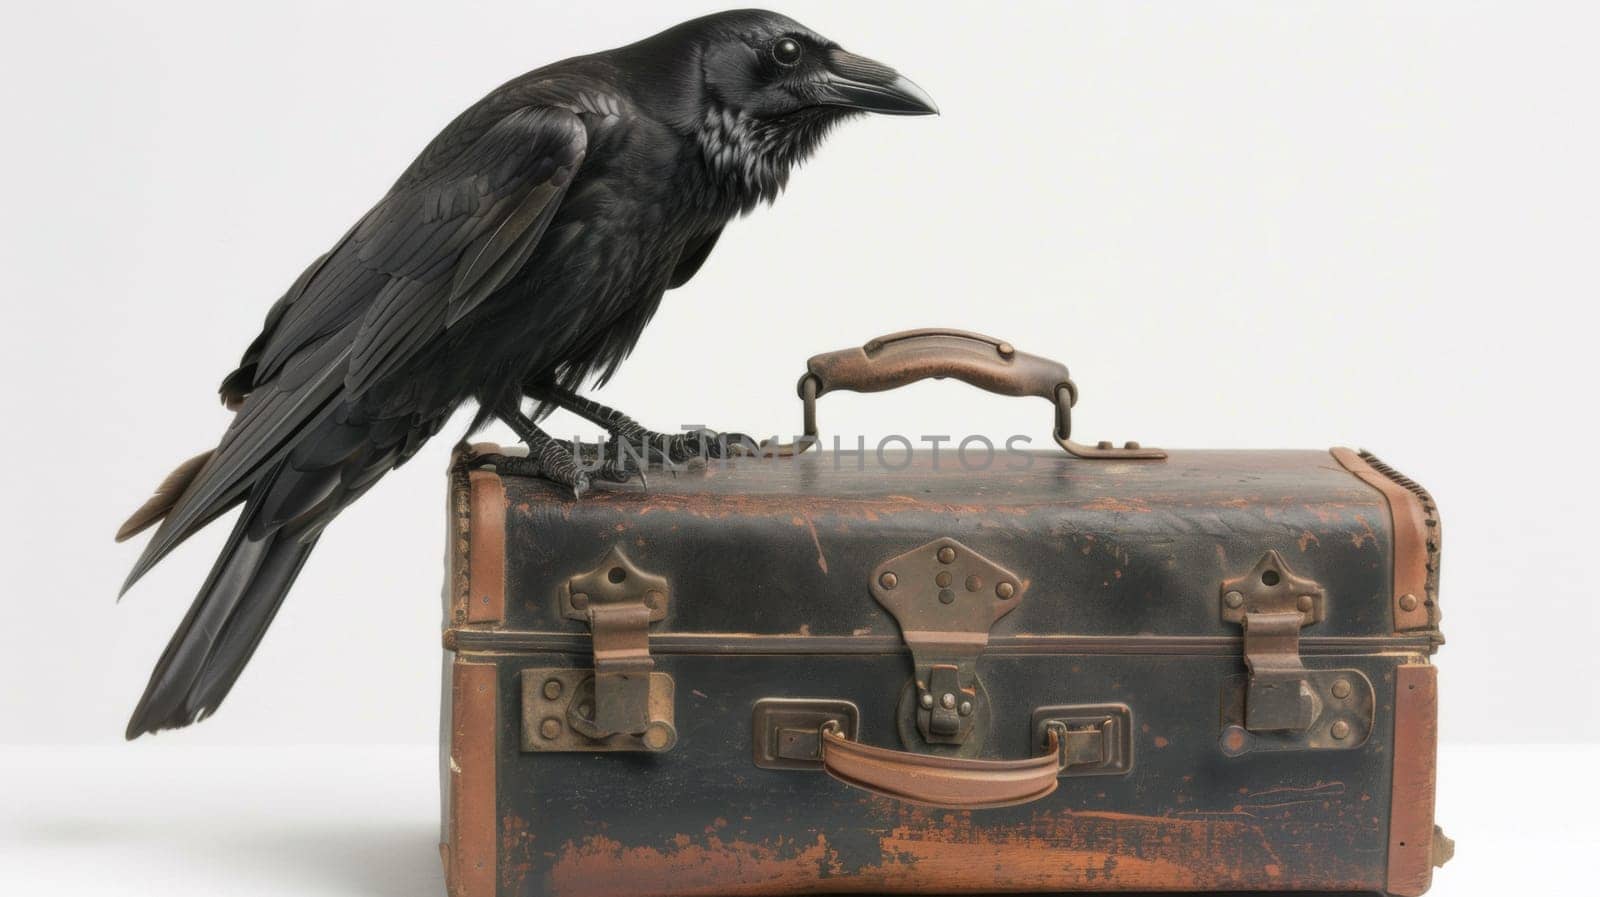 A black bird perched on a brown suitcase with white background